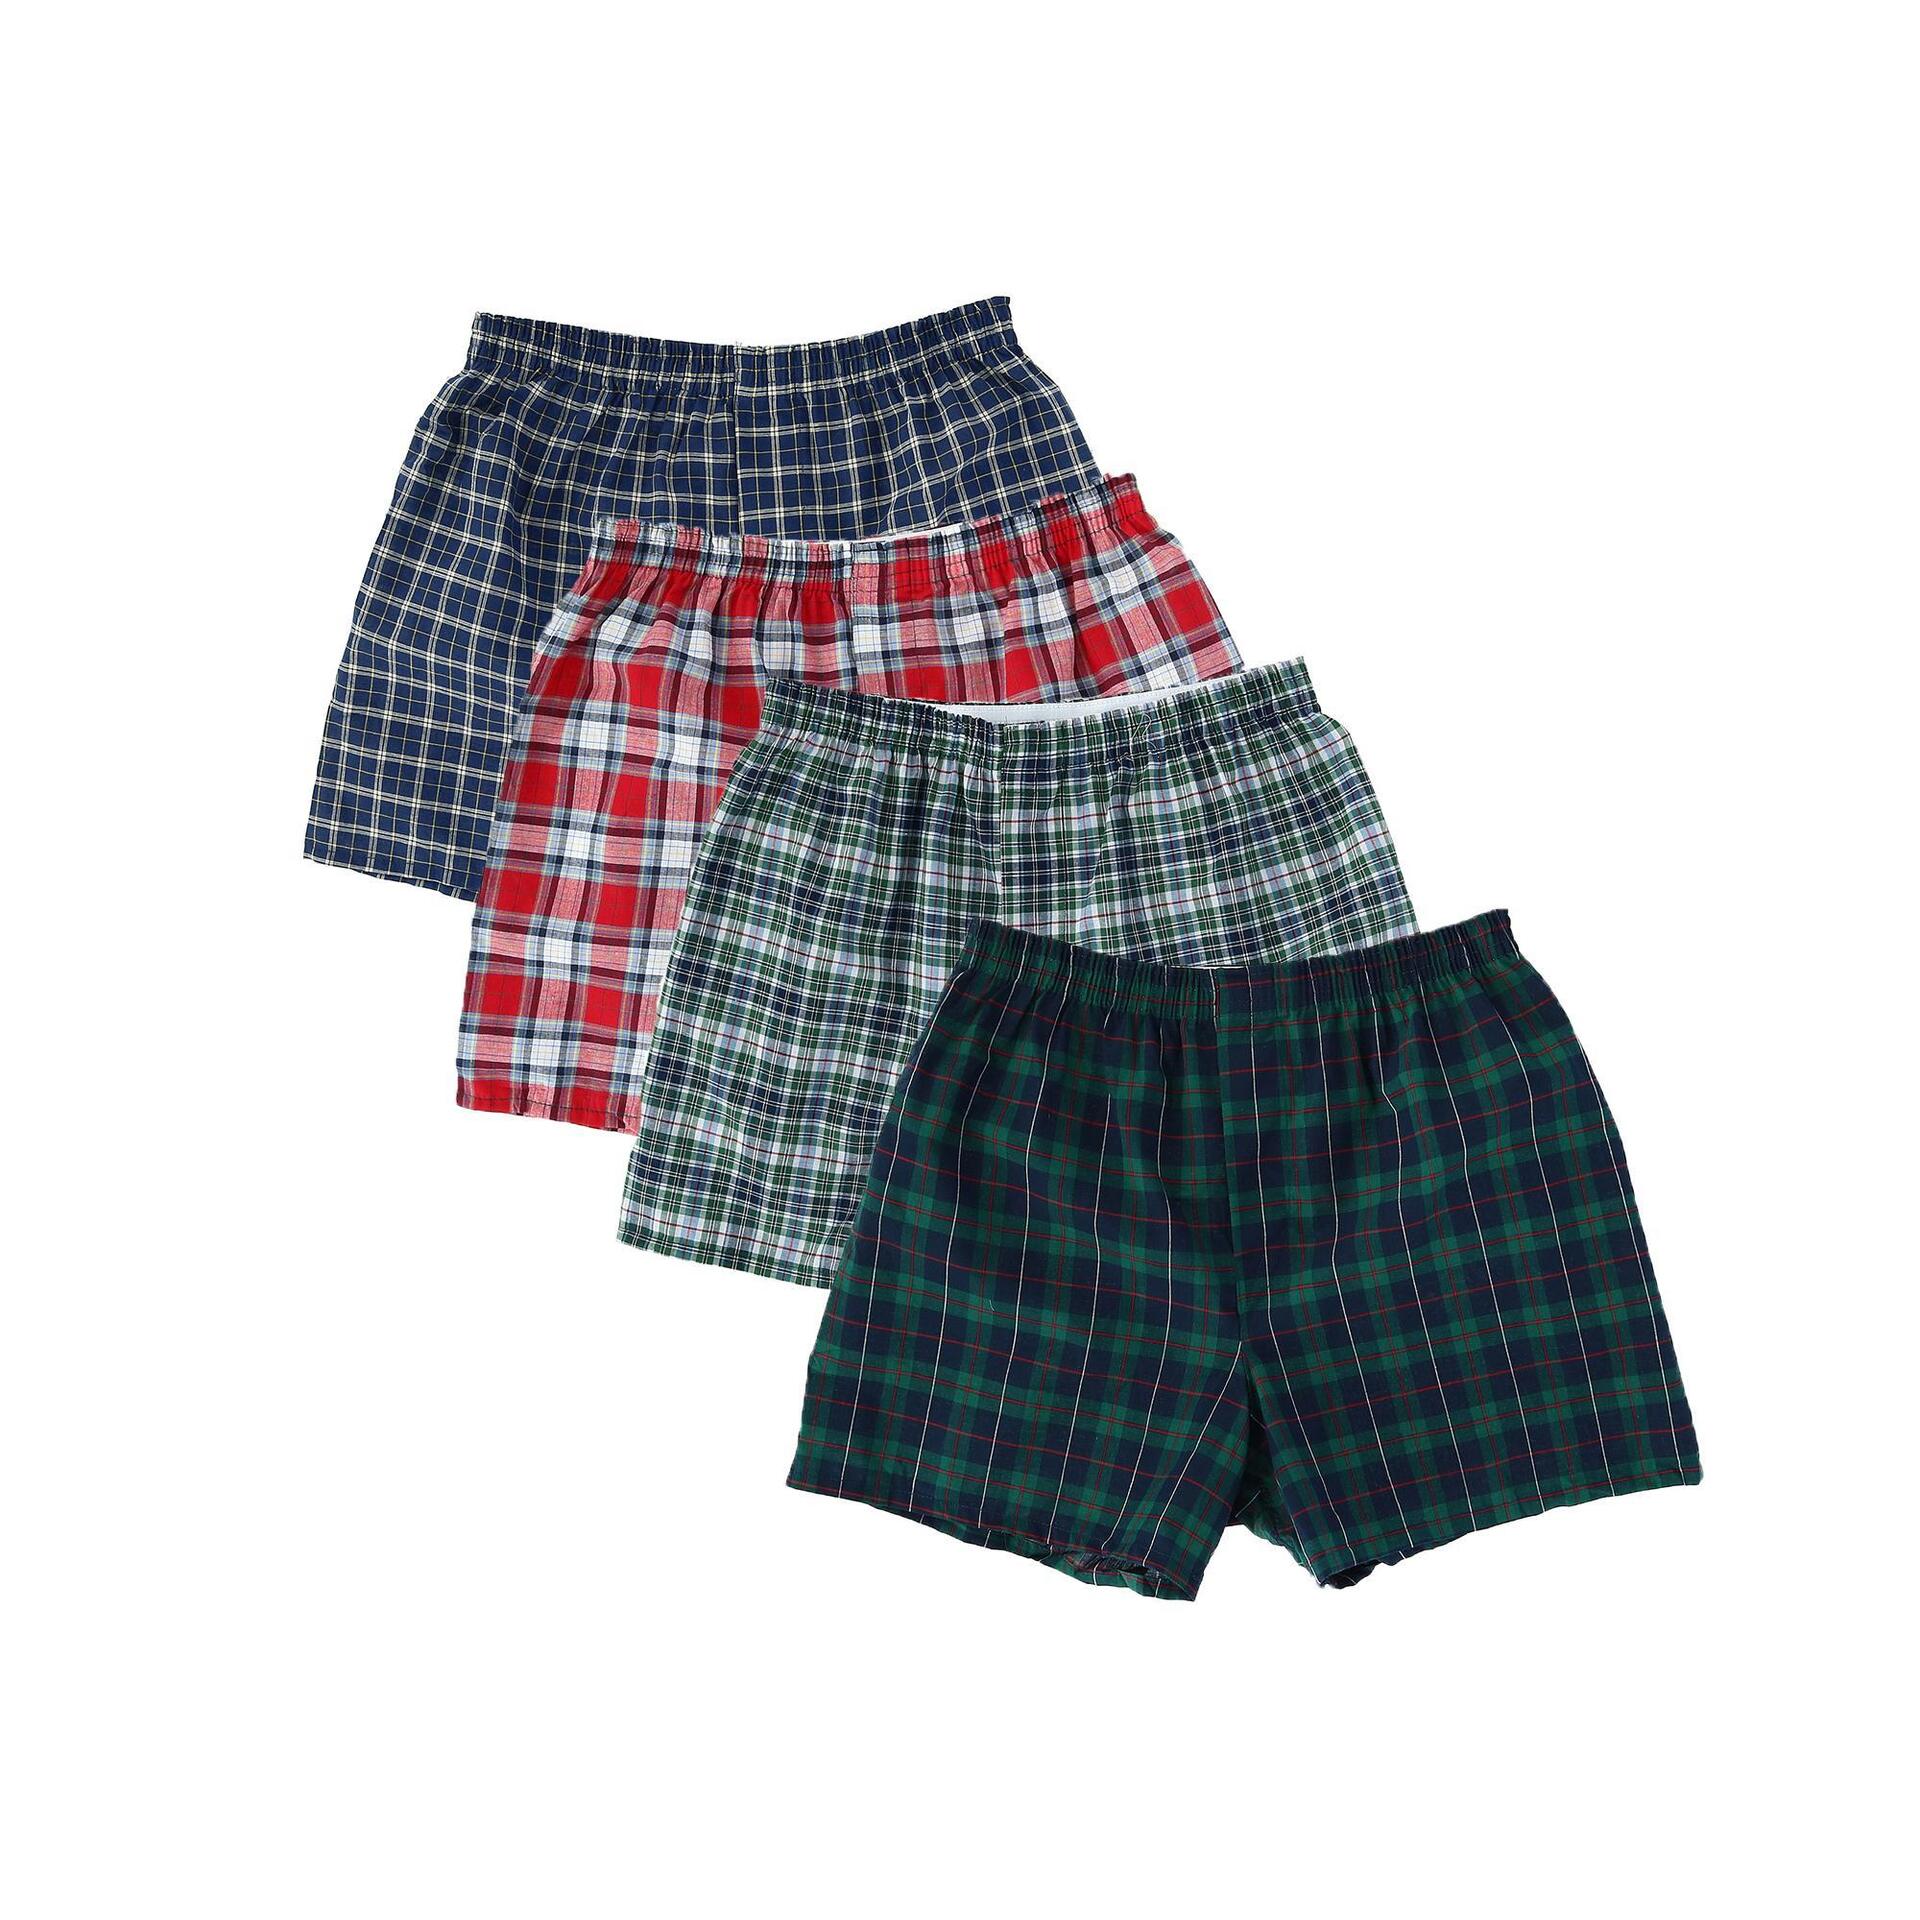 Fruit of the Loom Men's Big and Tall Woven Boxer Underwear (4 Pack) -